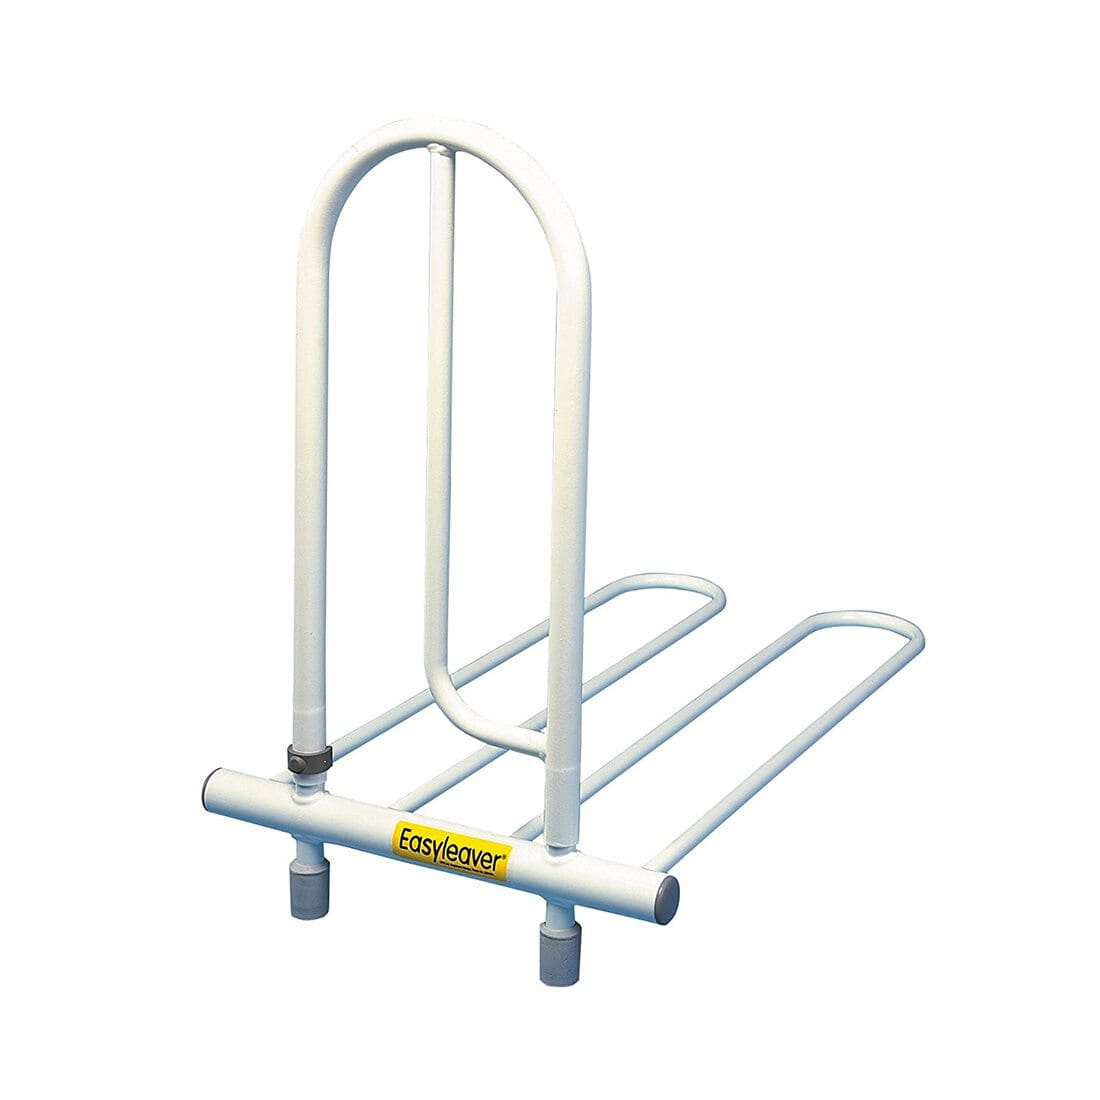 View Easylever Bed Rail information